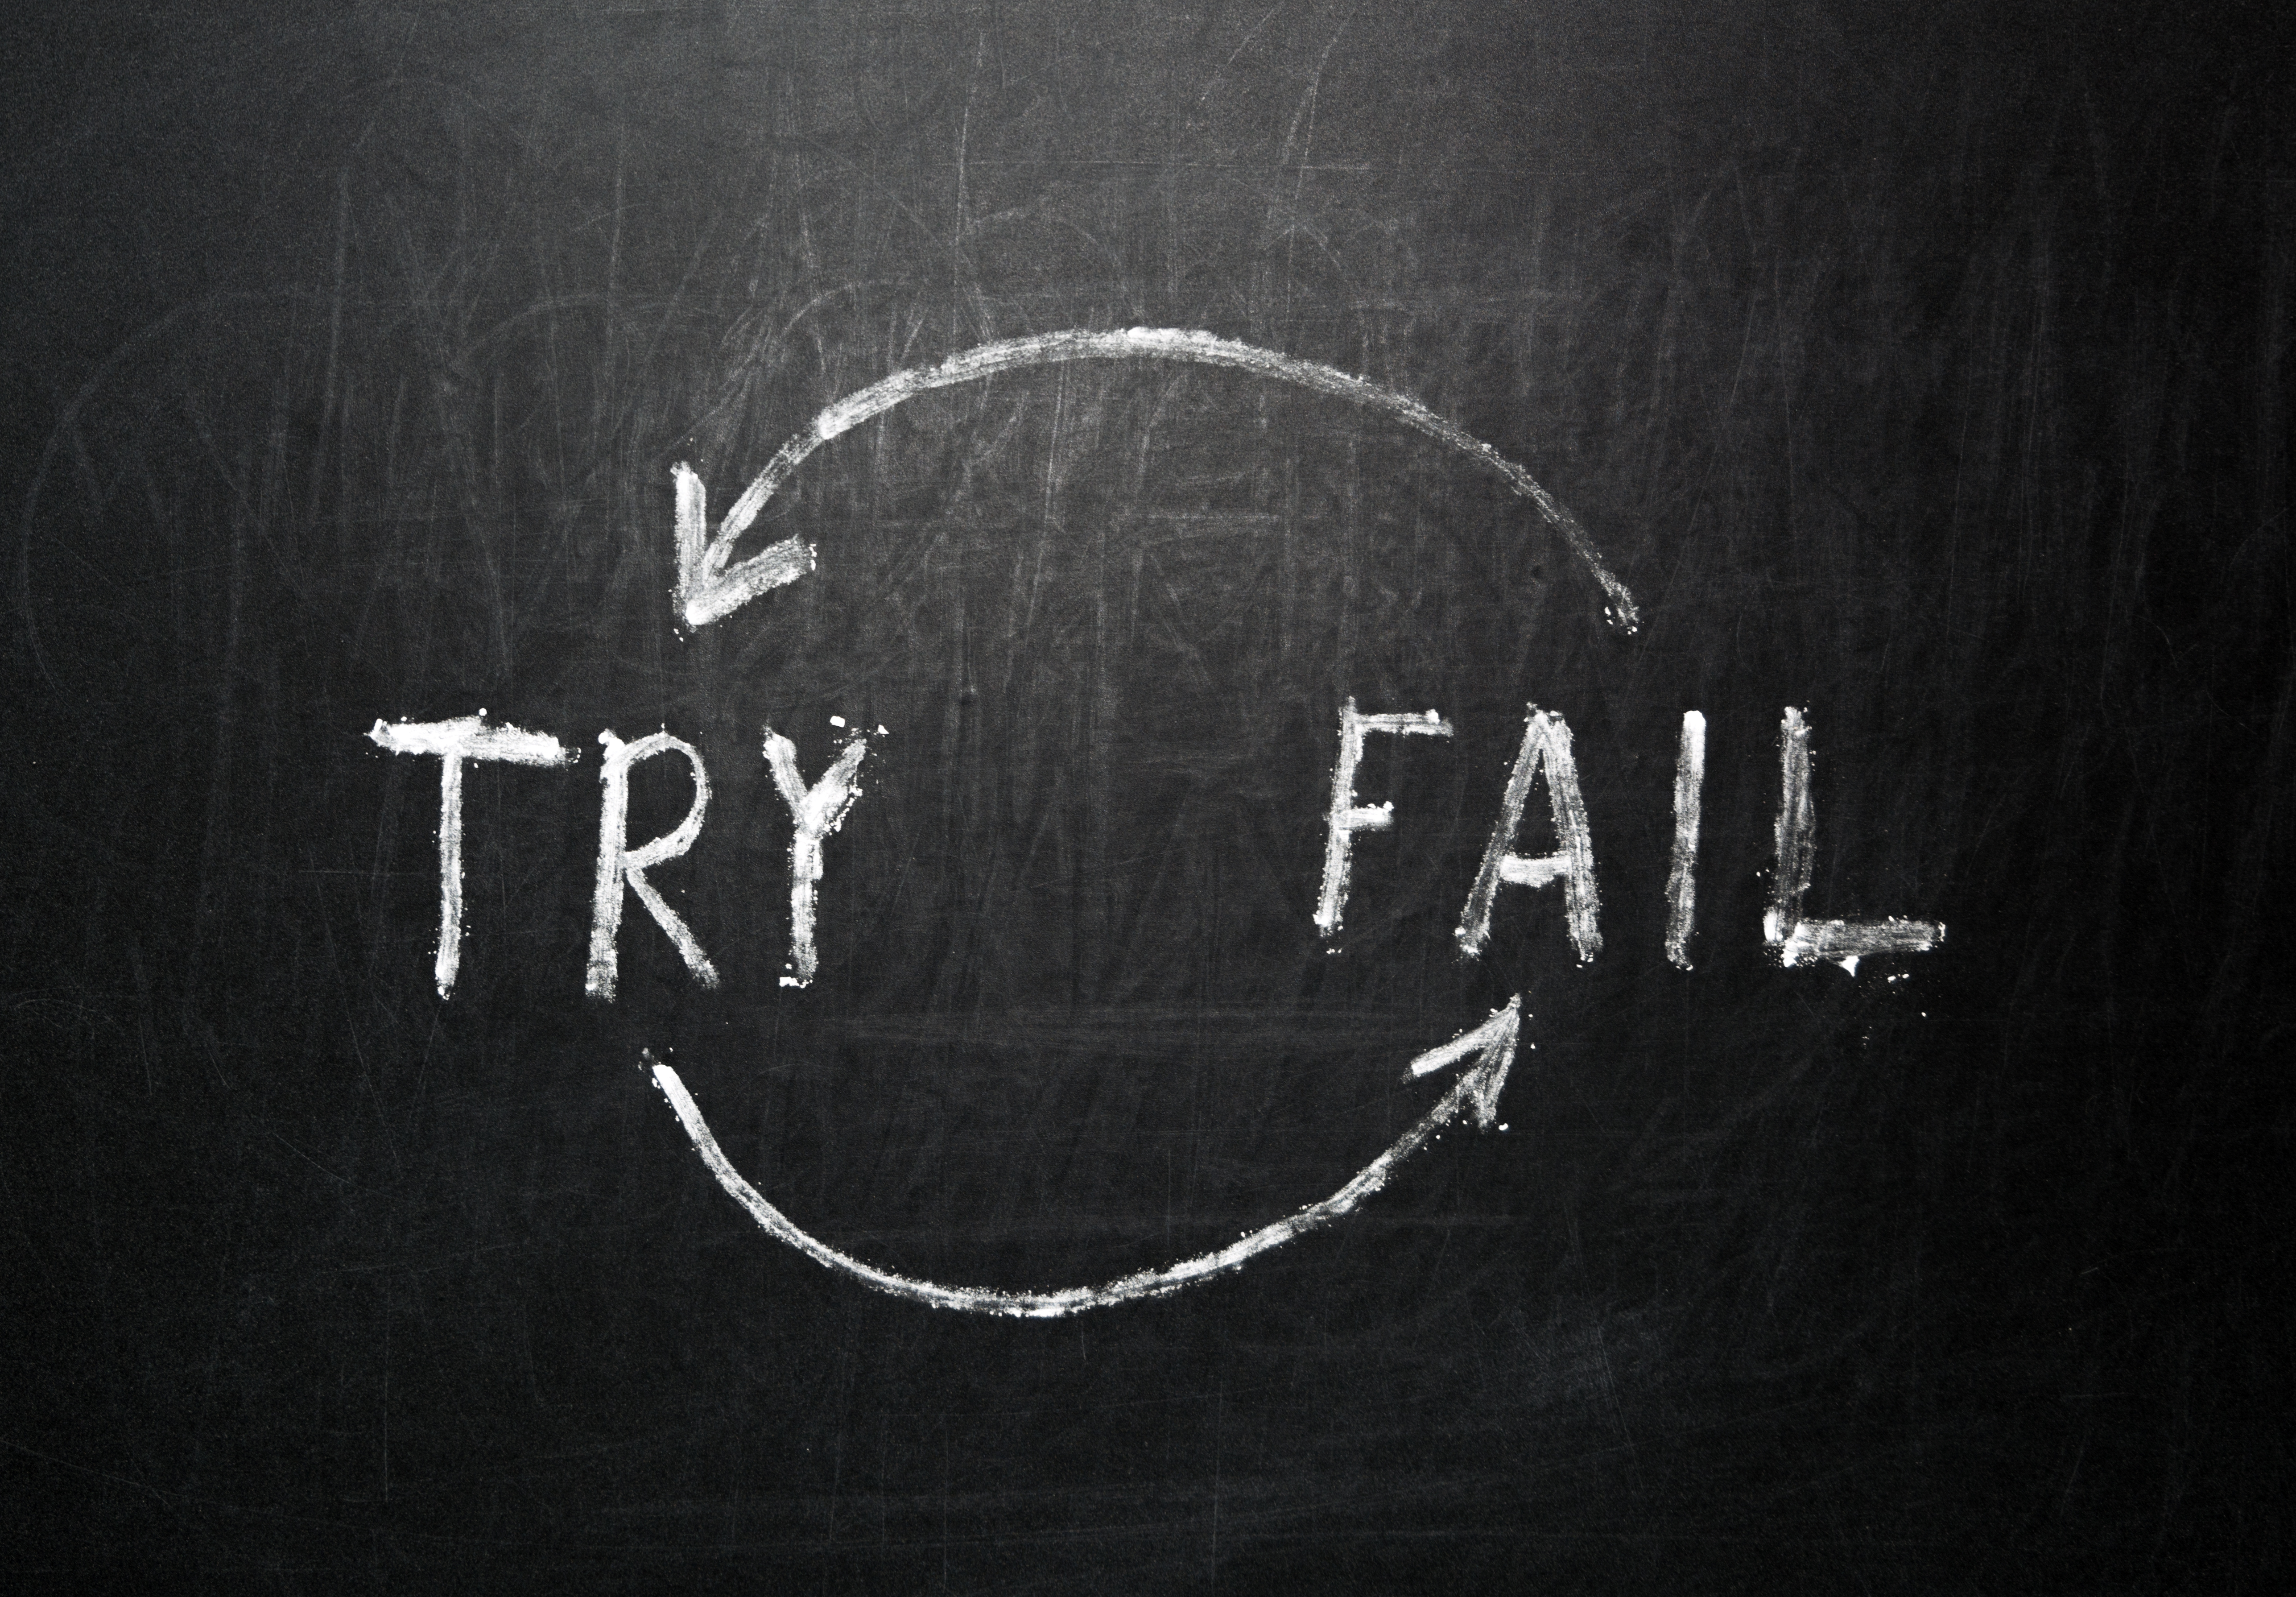 Try,And,Fail,Iteration,Handwritten,On,Black,Chalkboard.